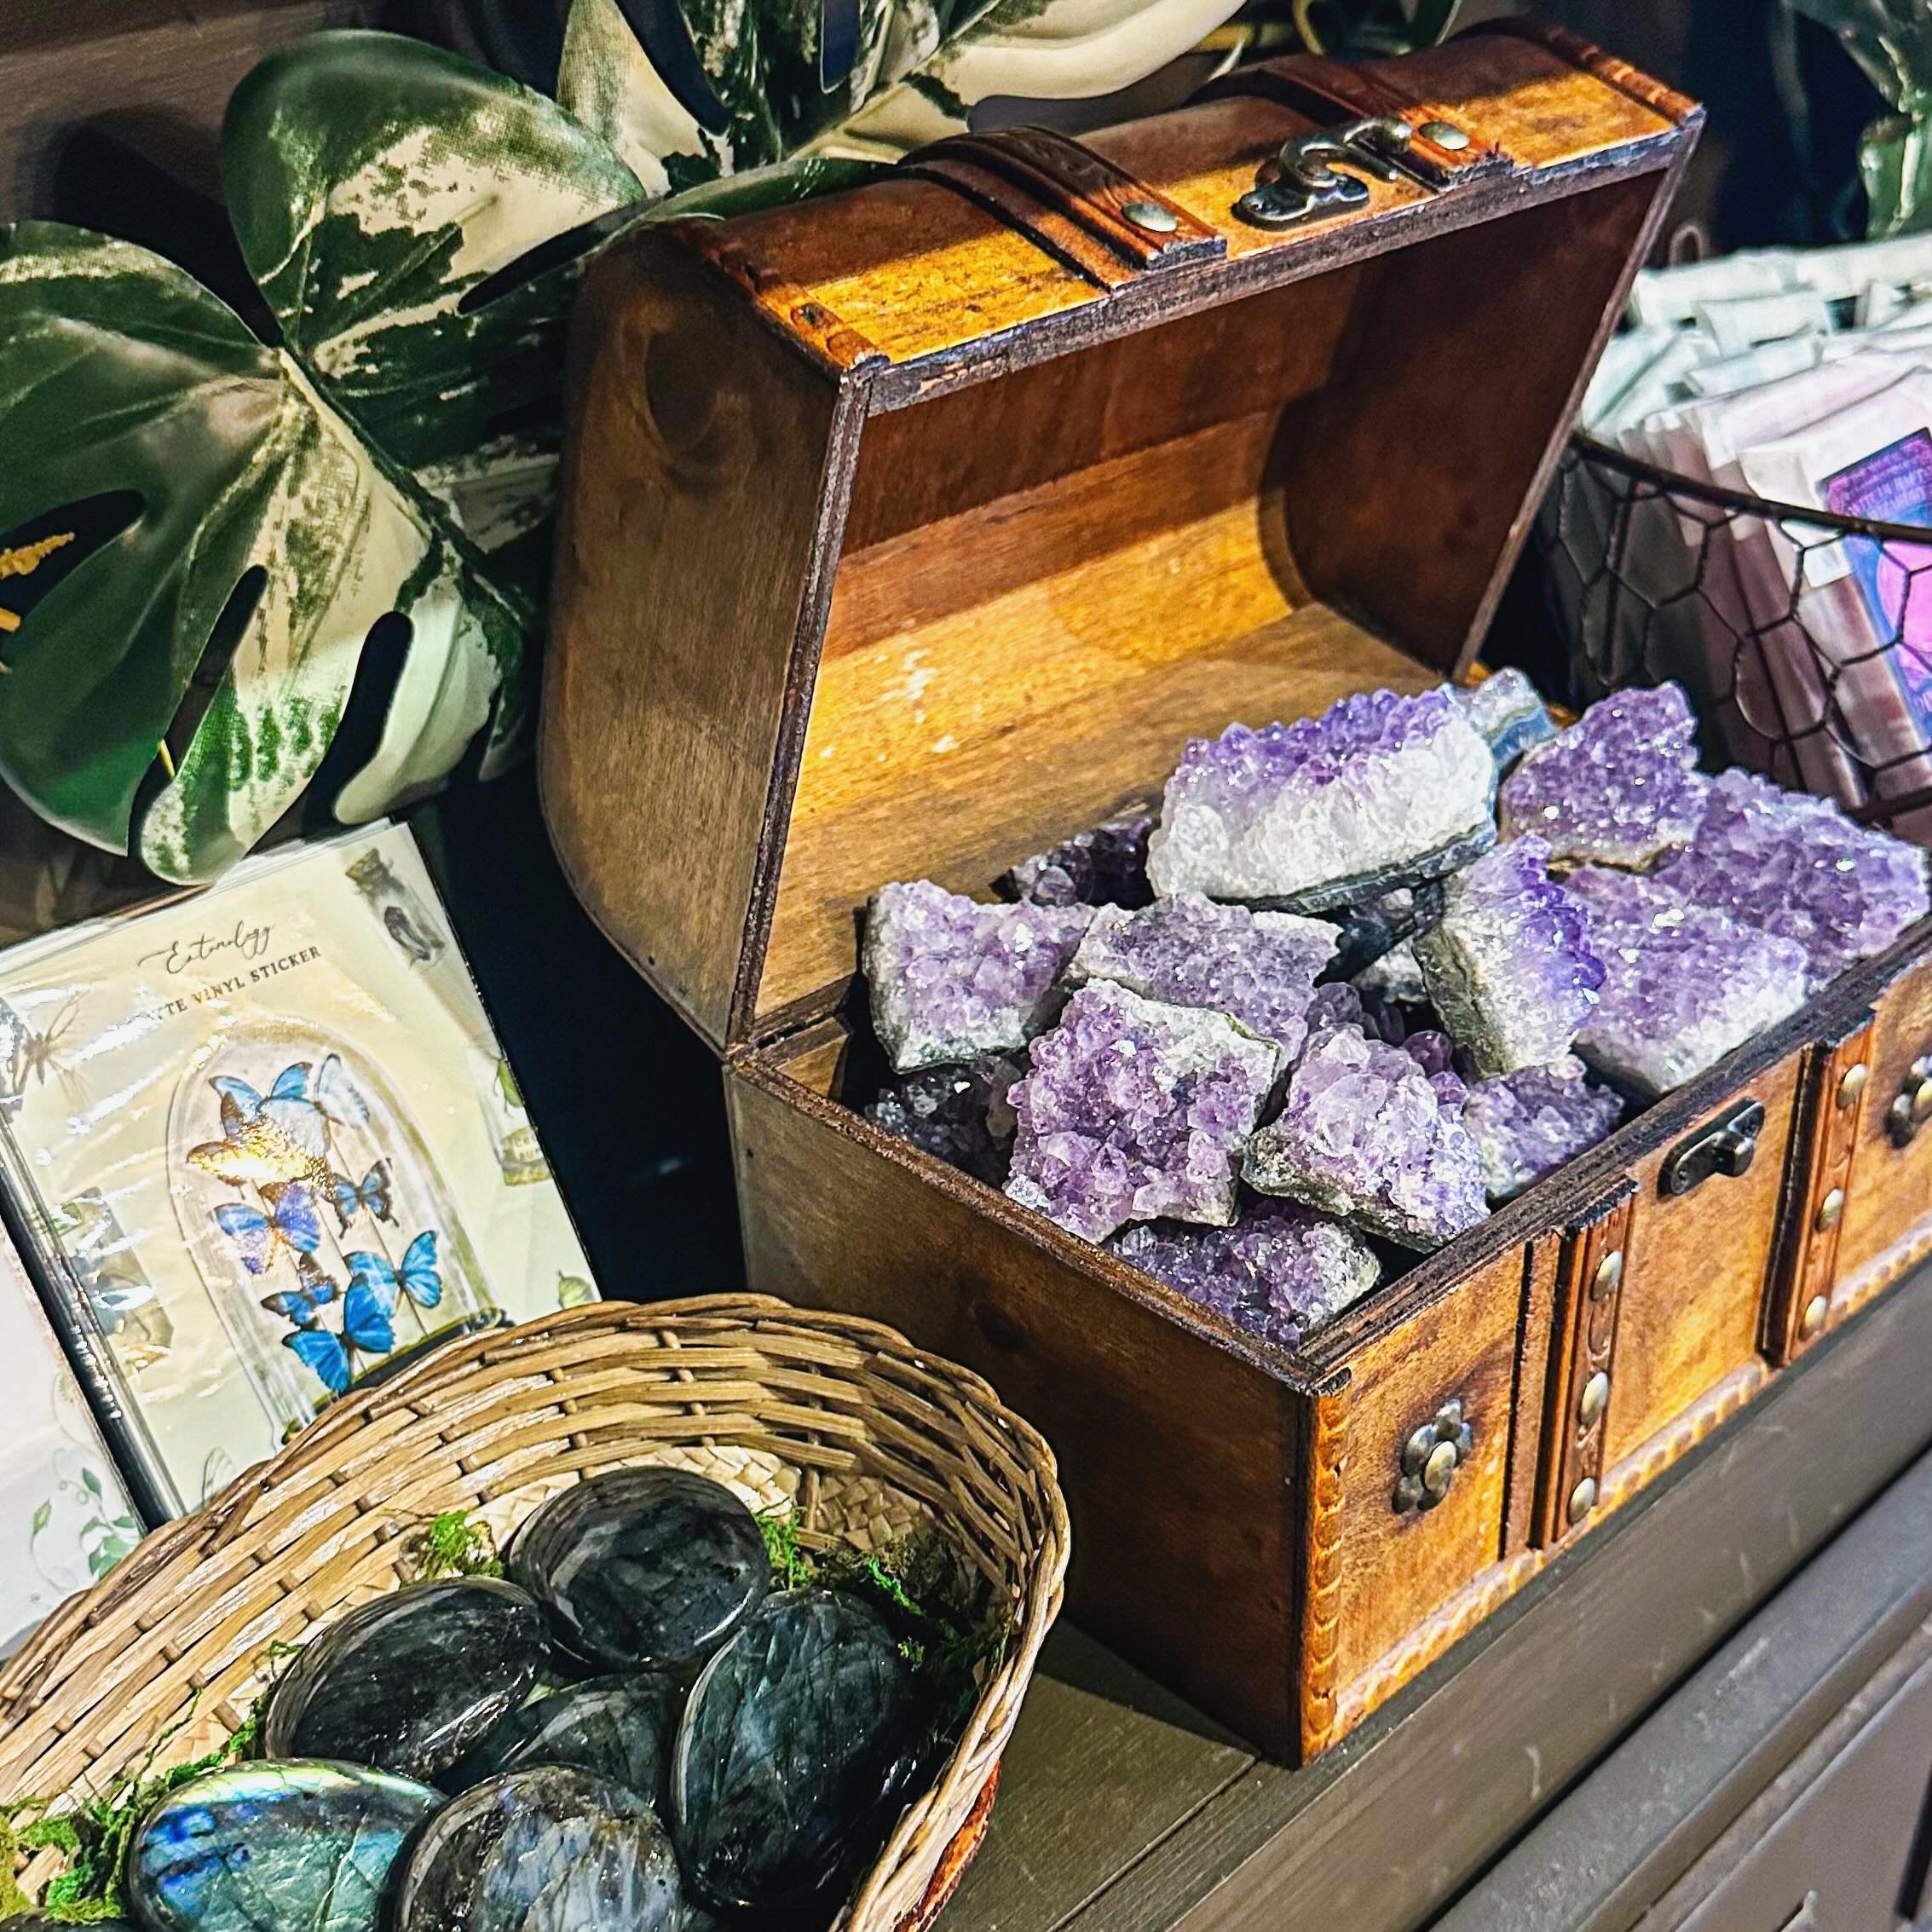 If you&rsquo;re a crystal collector or simply just drawn to shiny and beautiful treasures&hellip; you&rsquo;ll love our new trunk of Amethysts! 💎

Did you know 💡Amethyst is a captivating Purple quartz known for its mystical properties. It is believ